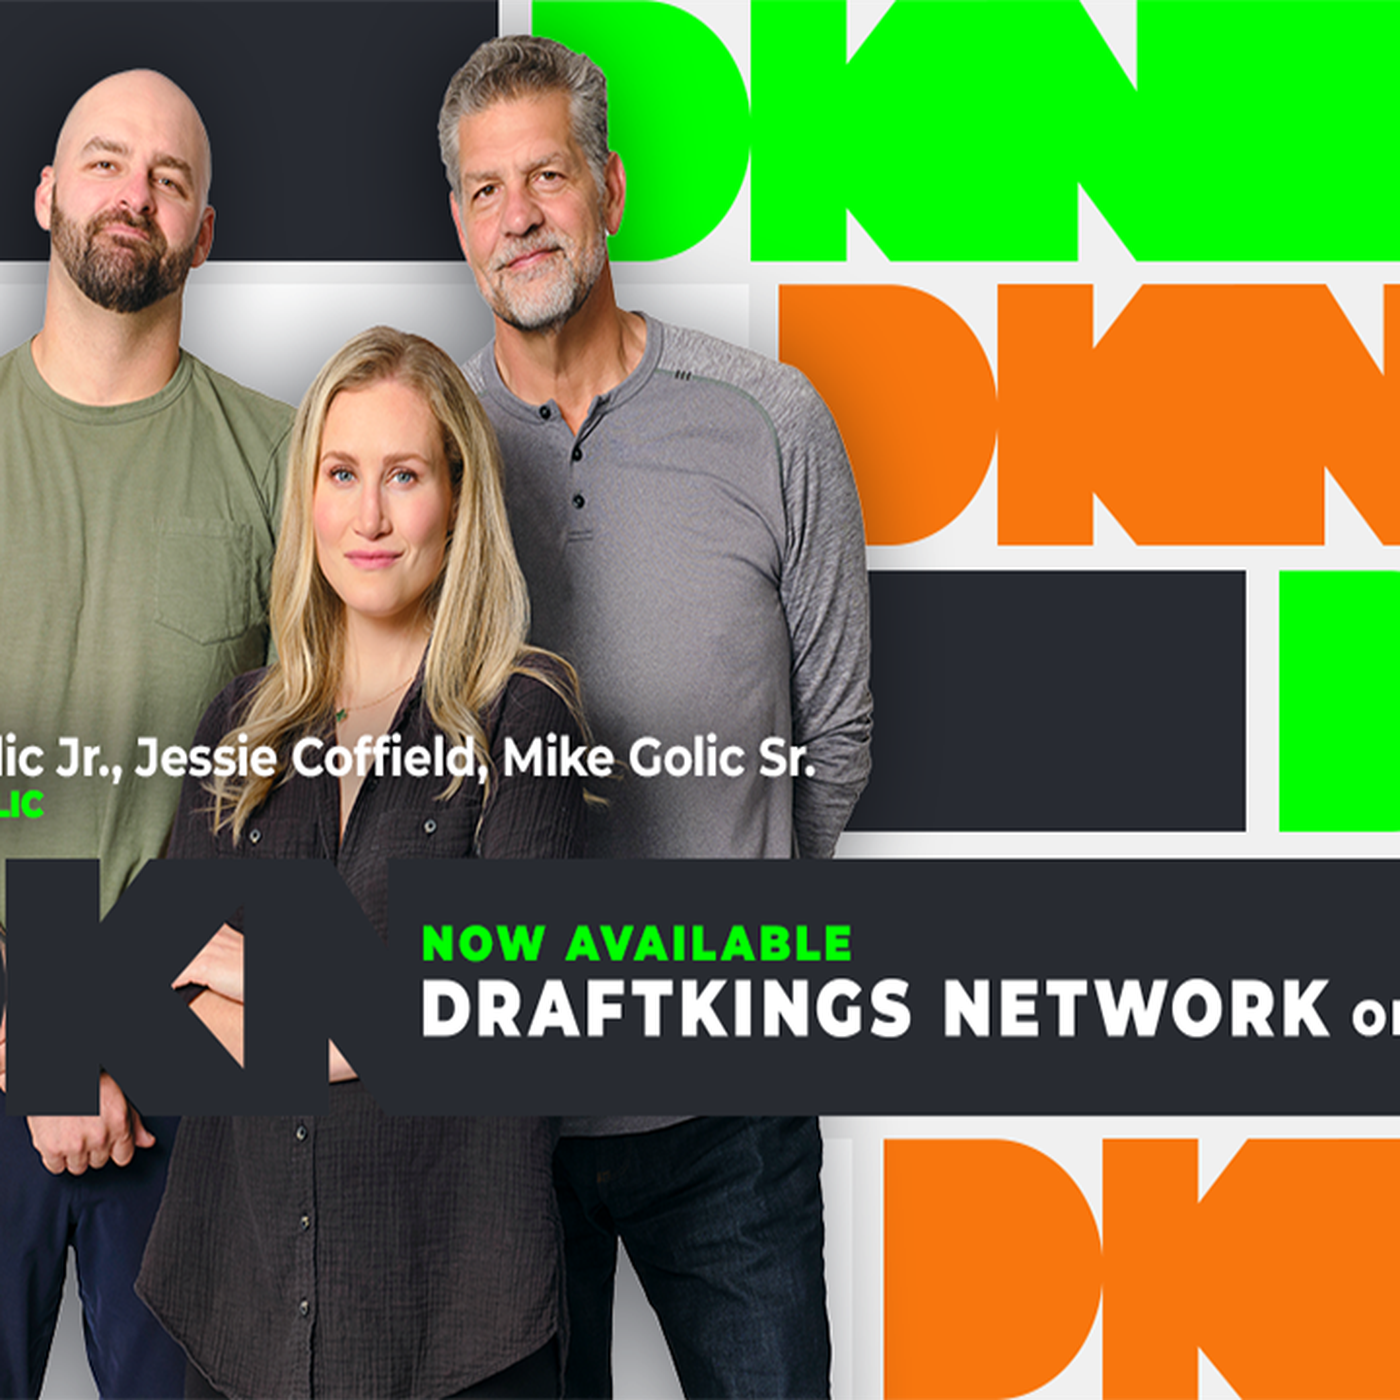 DraftKings Network is Now LIVE on The Roku Channel - DraftKings Network